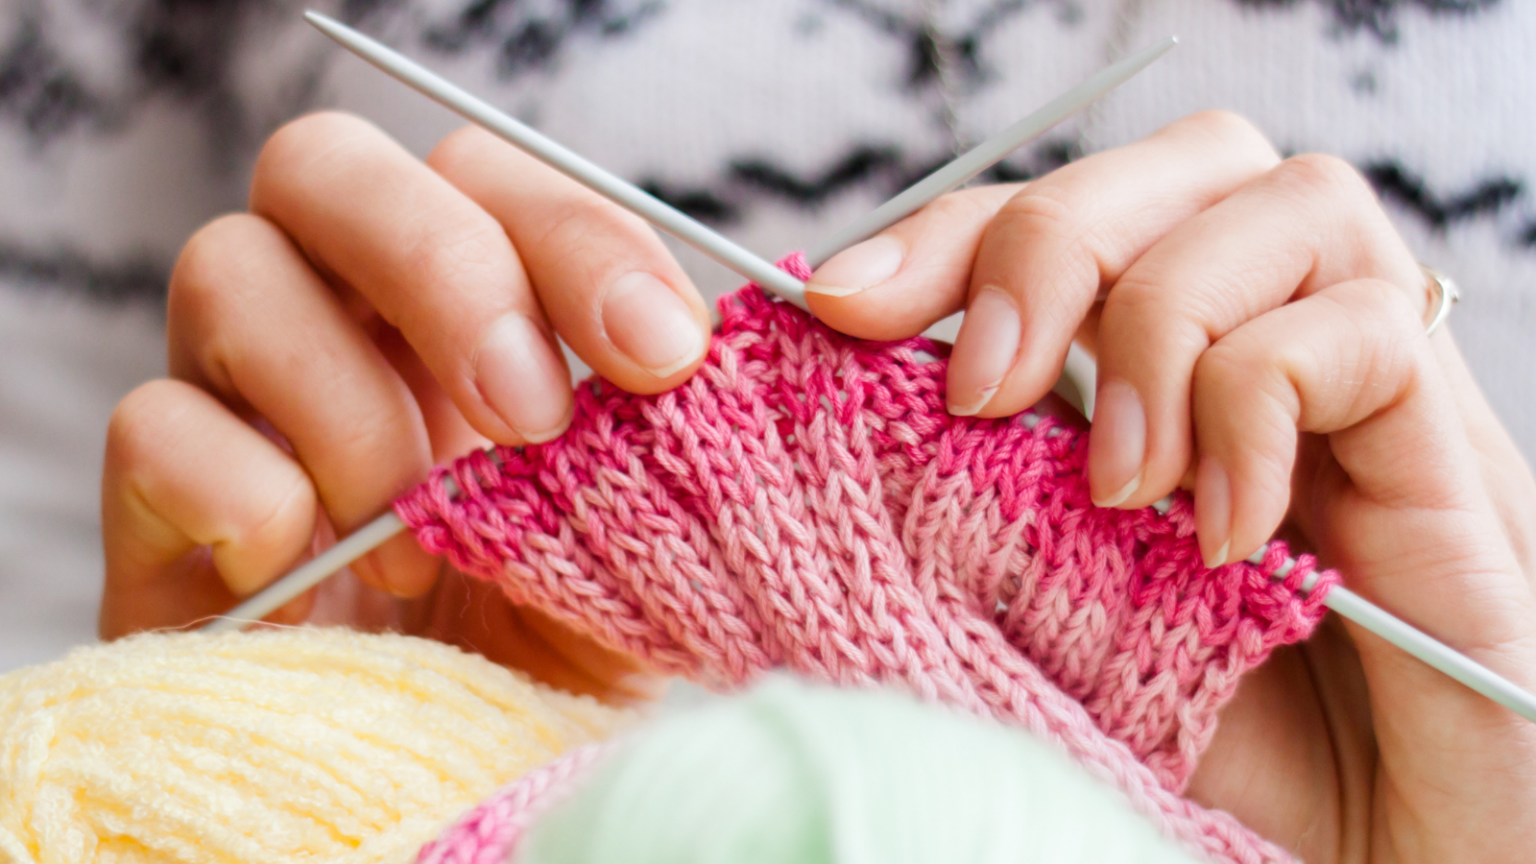 A photo of knitting hands.